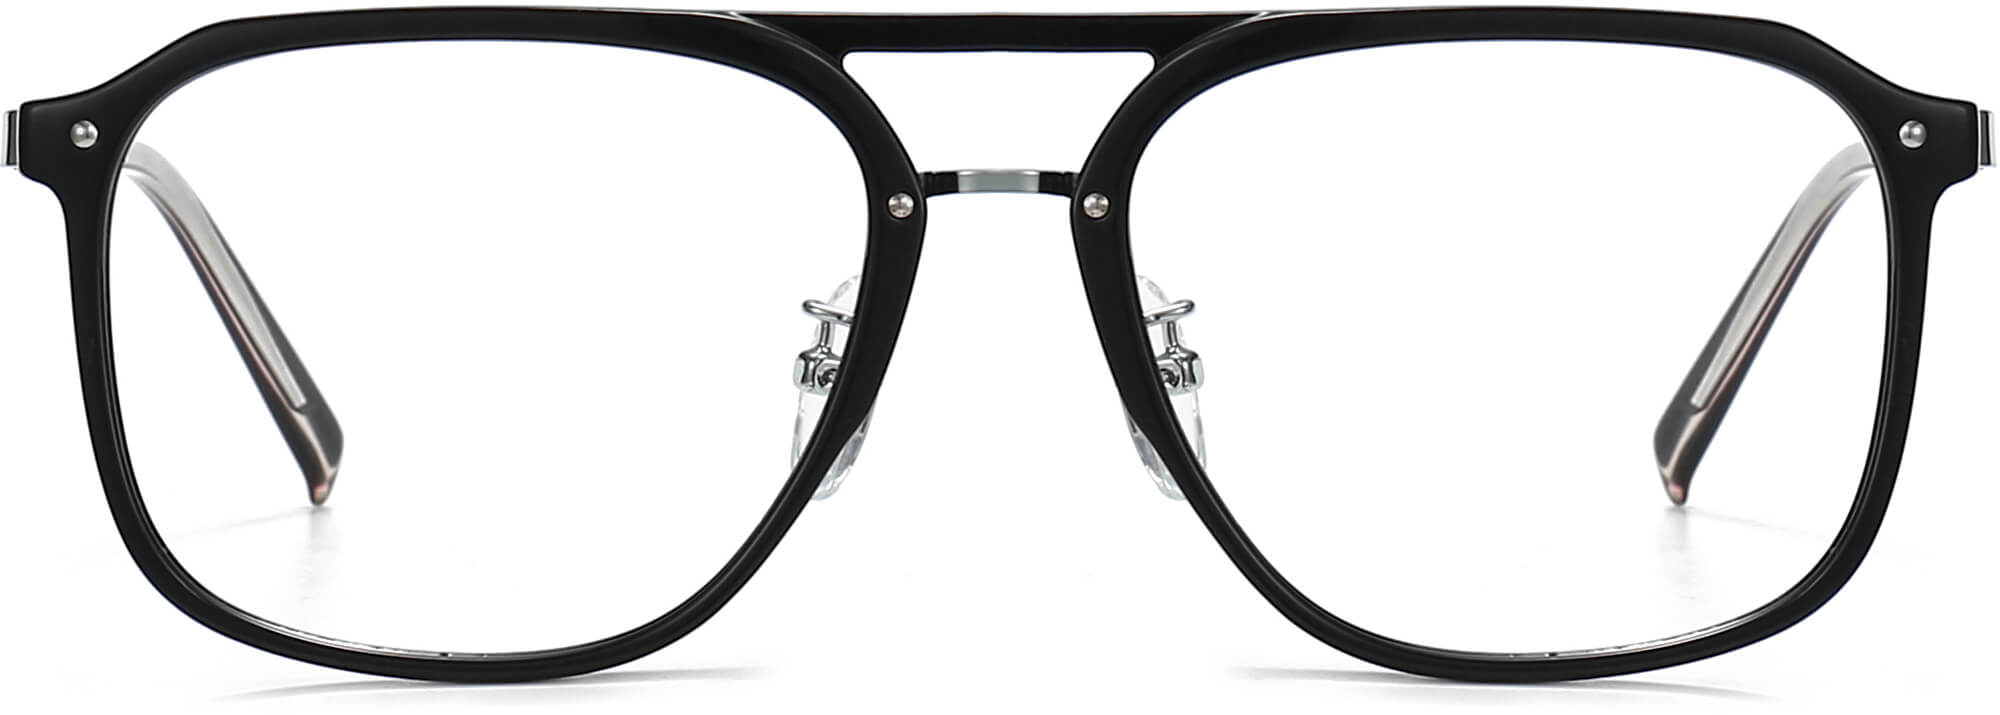 Wells Square Black Eyeglasses from ANRRI, front view